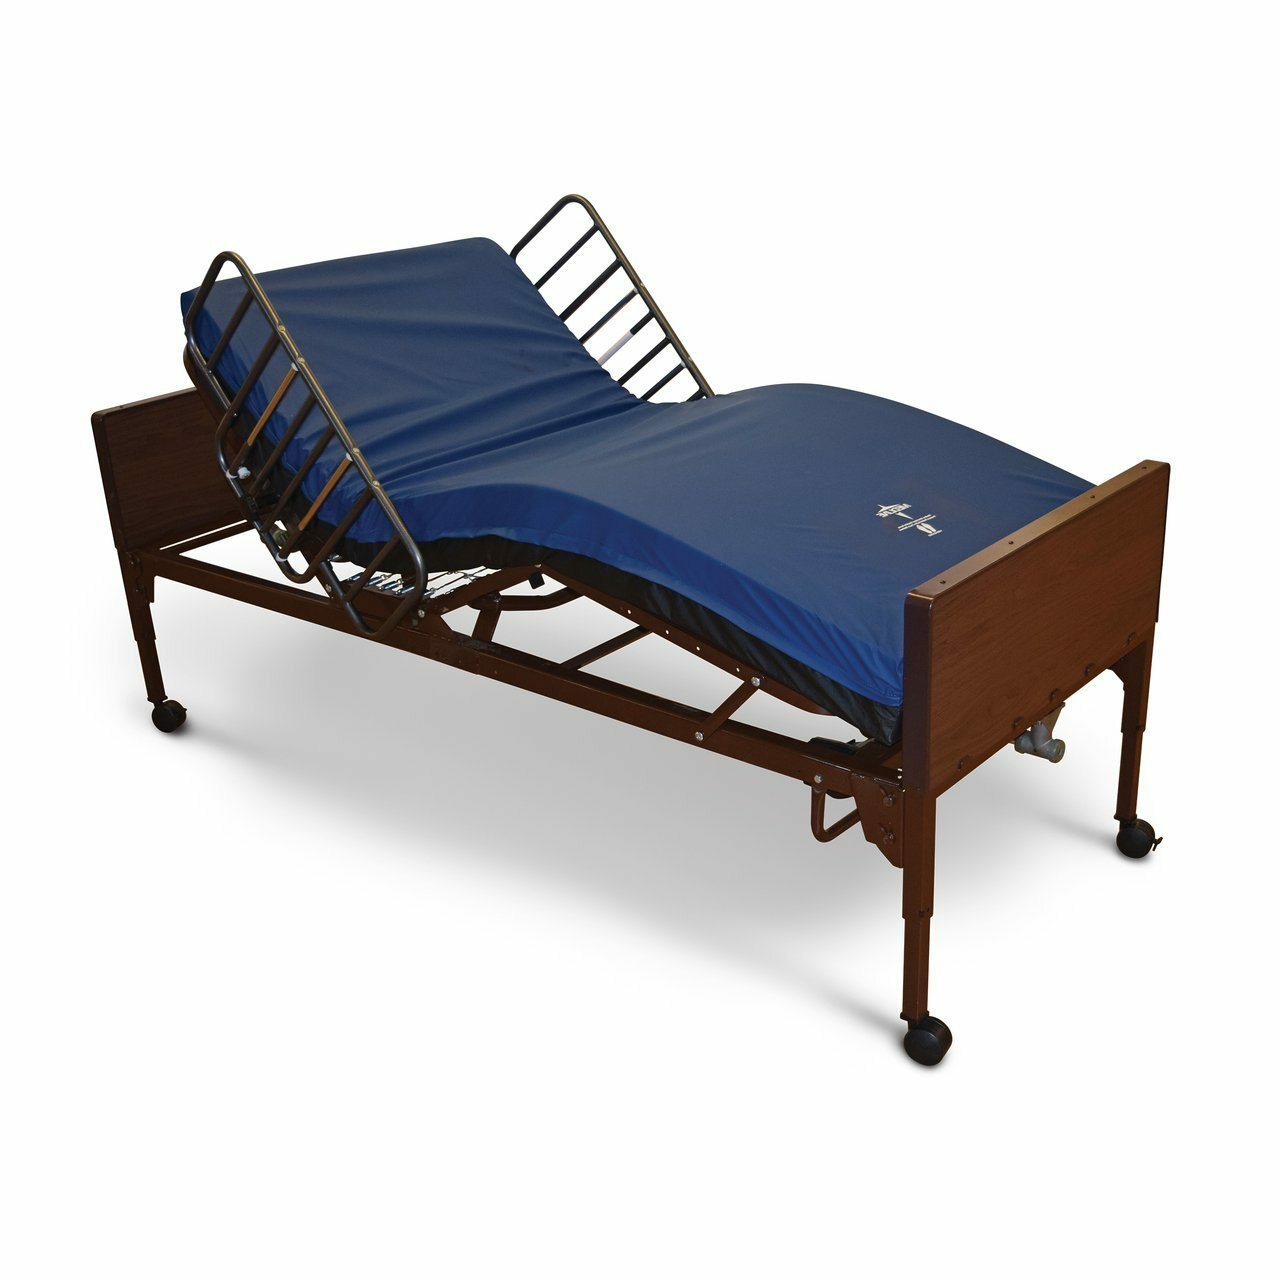 Get an Electric Hospital Bed Rental in Dallas